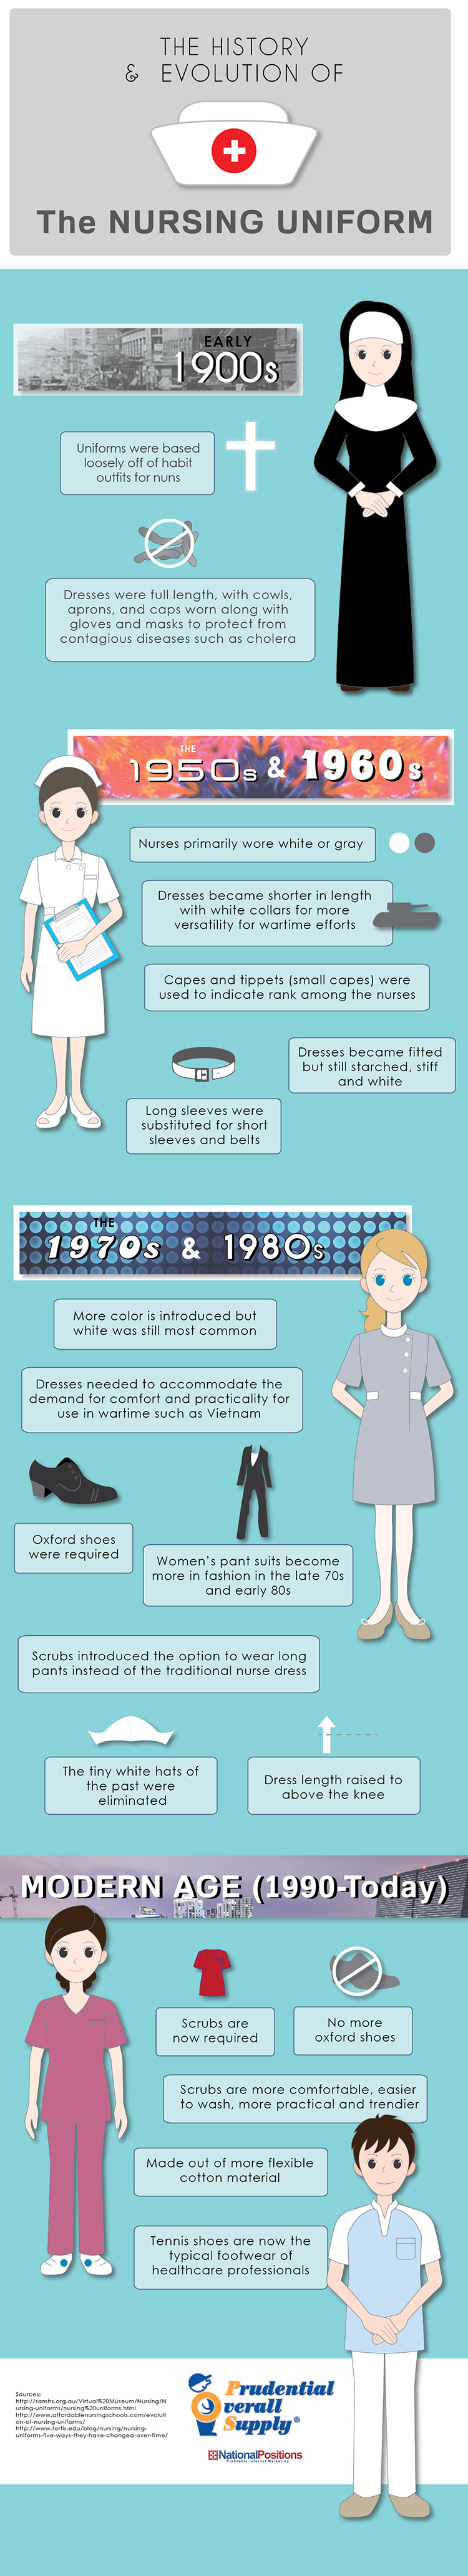 The History and Evolution of the Nursing Uniform